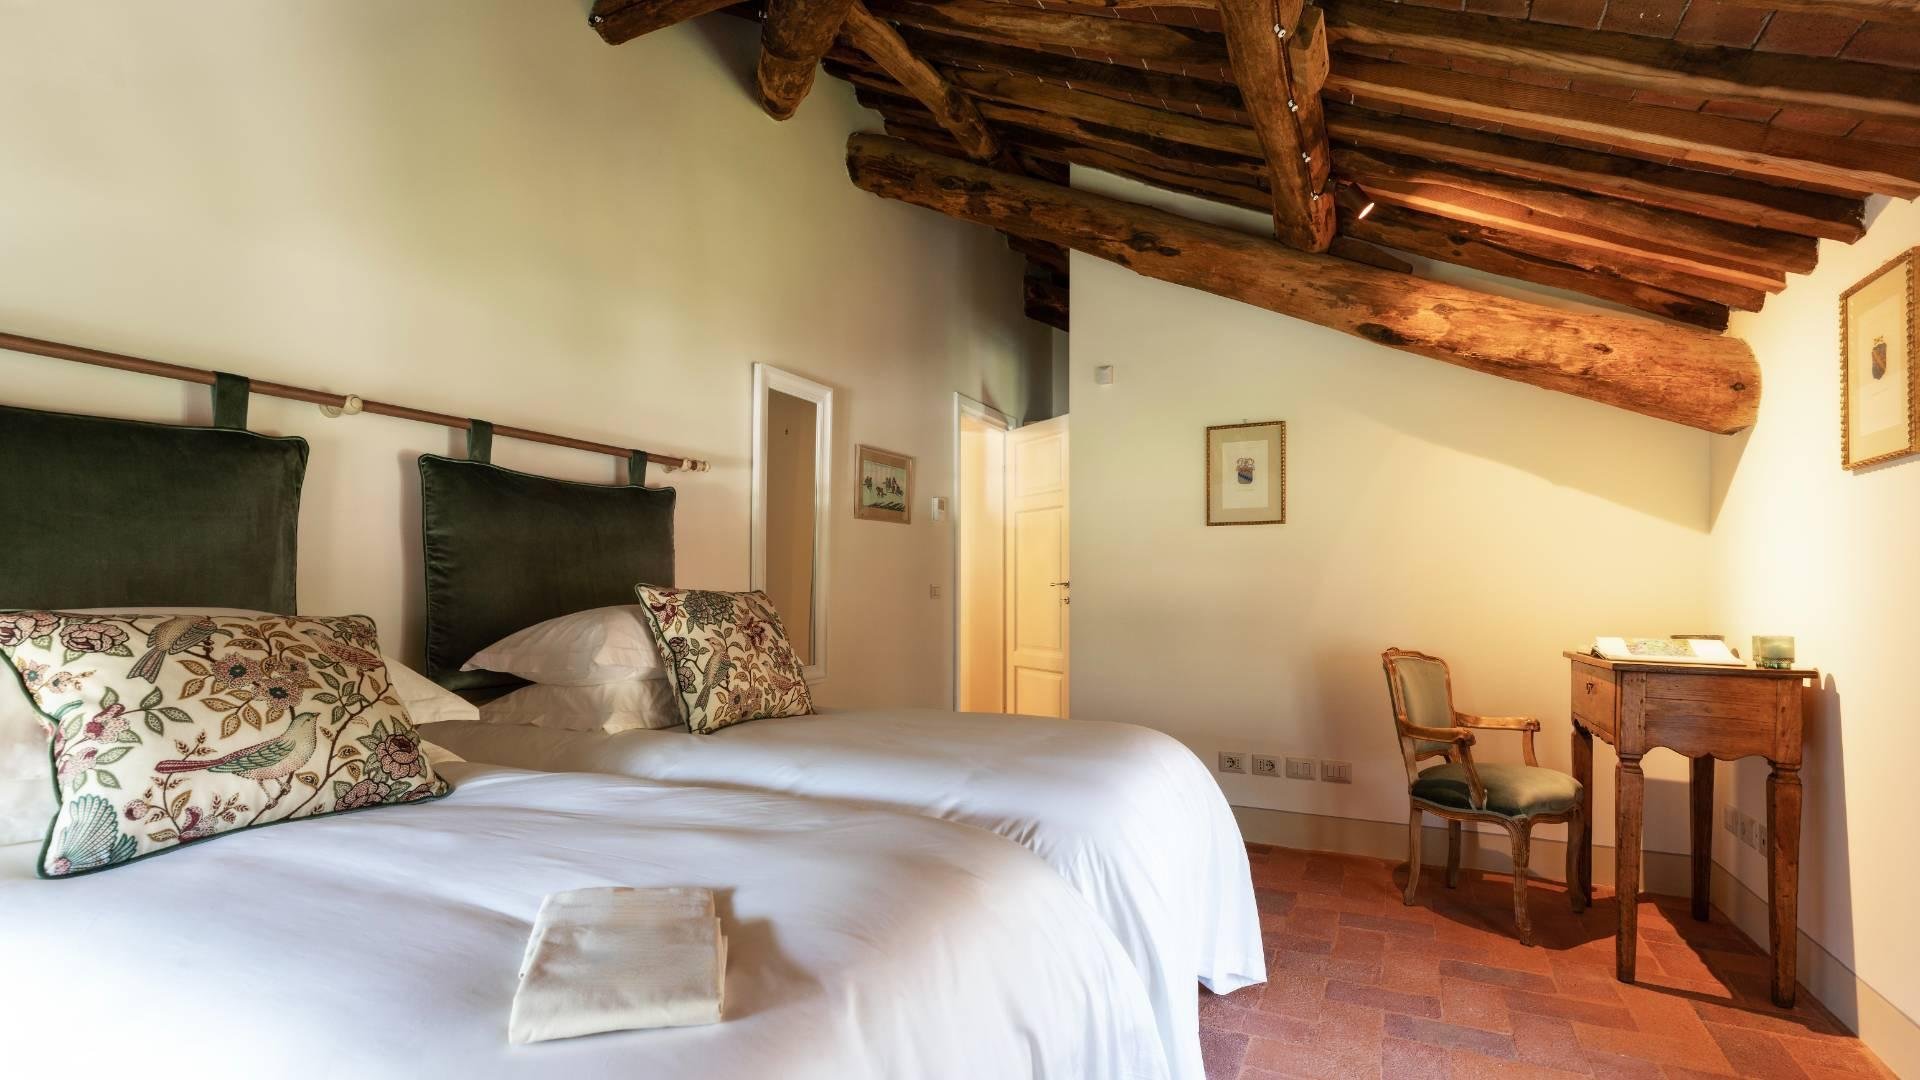 Francis York Book a Stay This Summer at Villa de Camelie Luxury Villa Rental Near Lucca in Tuscany, Italy Sothebys Realty Retreats 3.jpeg